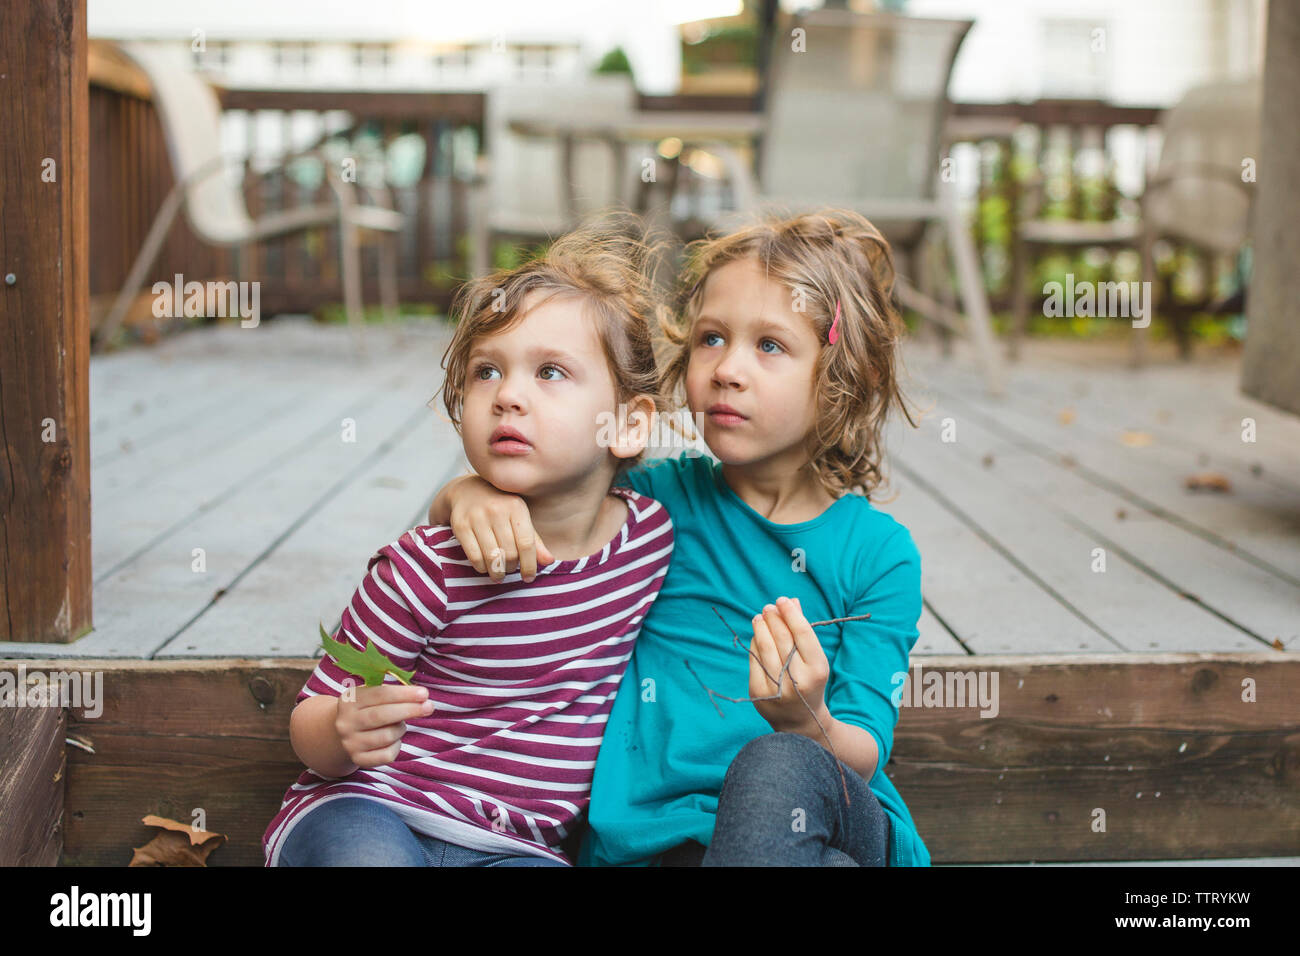 two little girls with their arms around each other sit outside Stock Photo